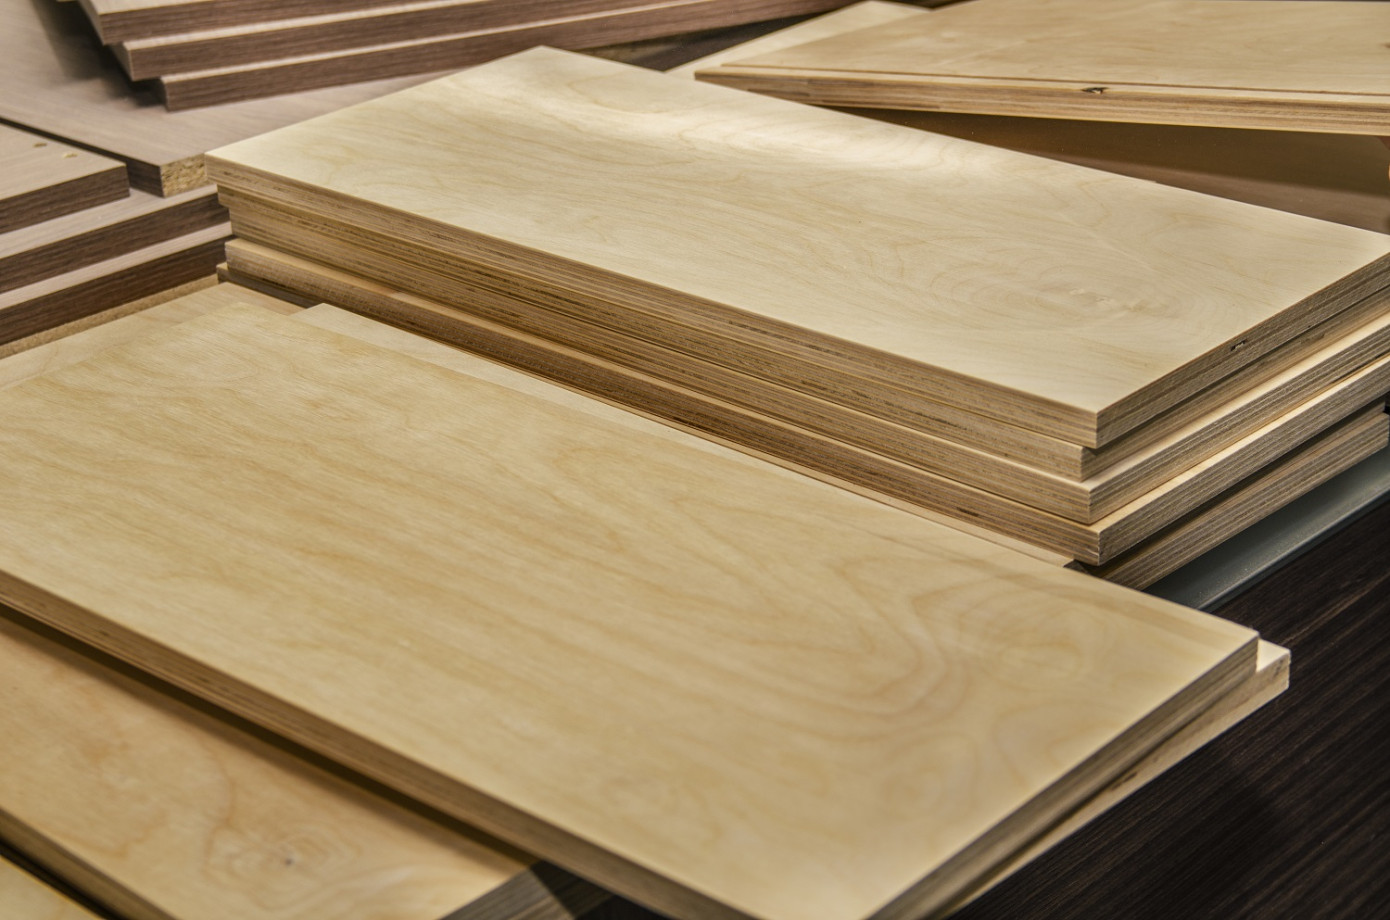 In February, price for plywood imported to United Kingdom grows 18%